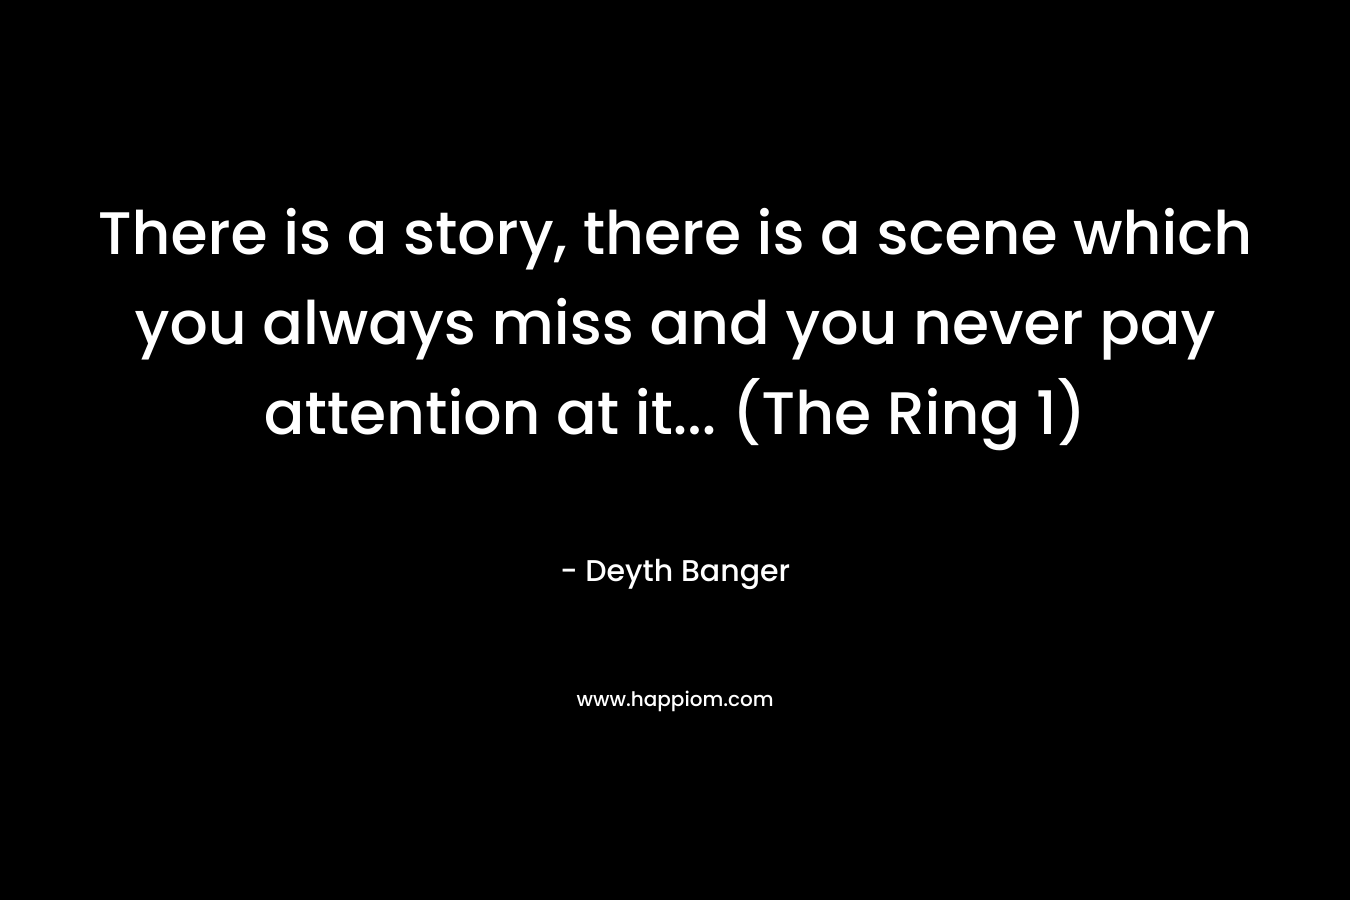 There is a story, there is a scene which you always miss and you never pay attention at it… (The Ring 1) – Deyth Banger